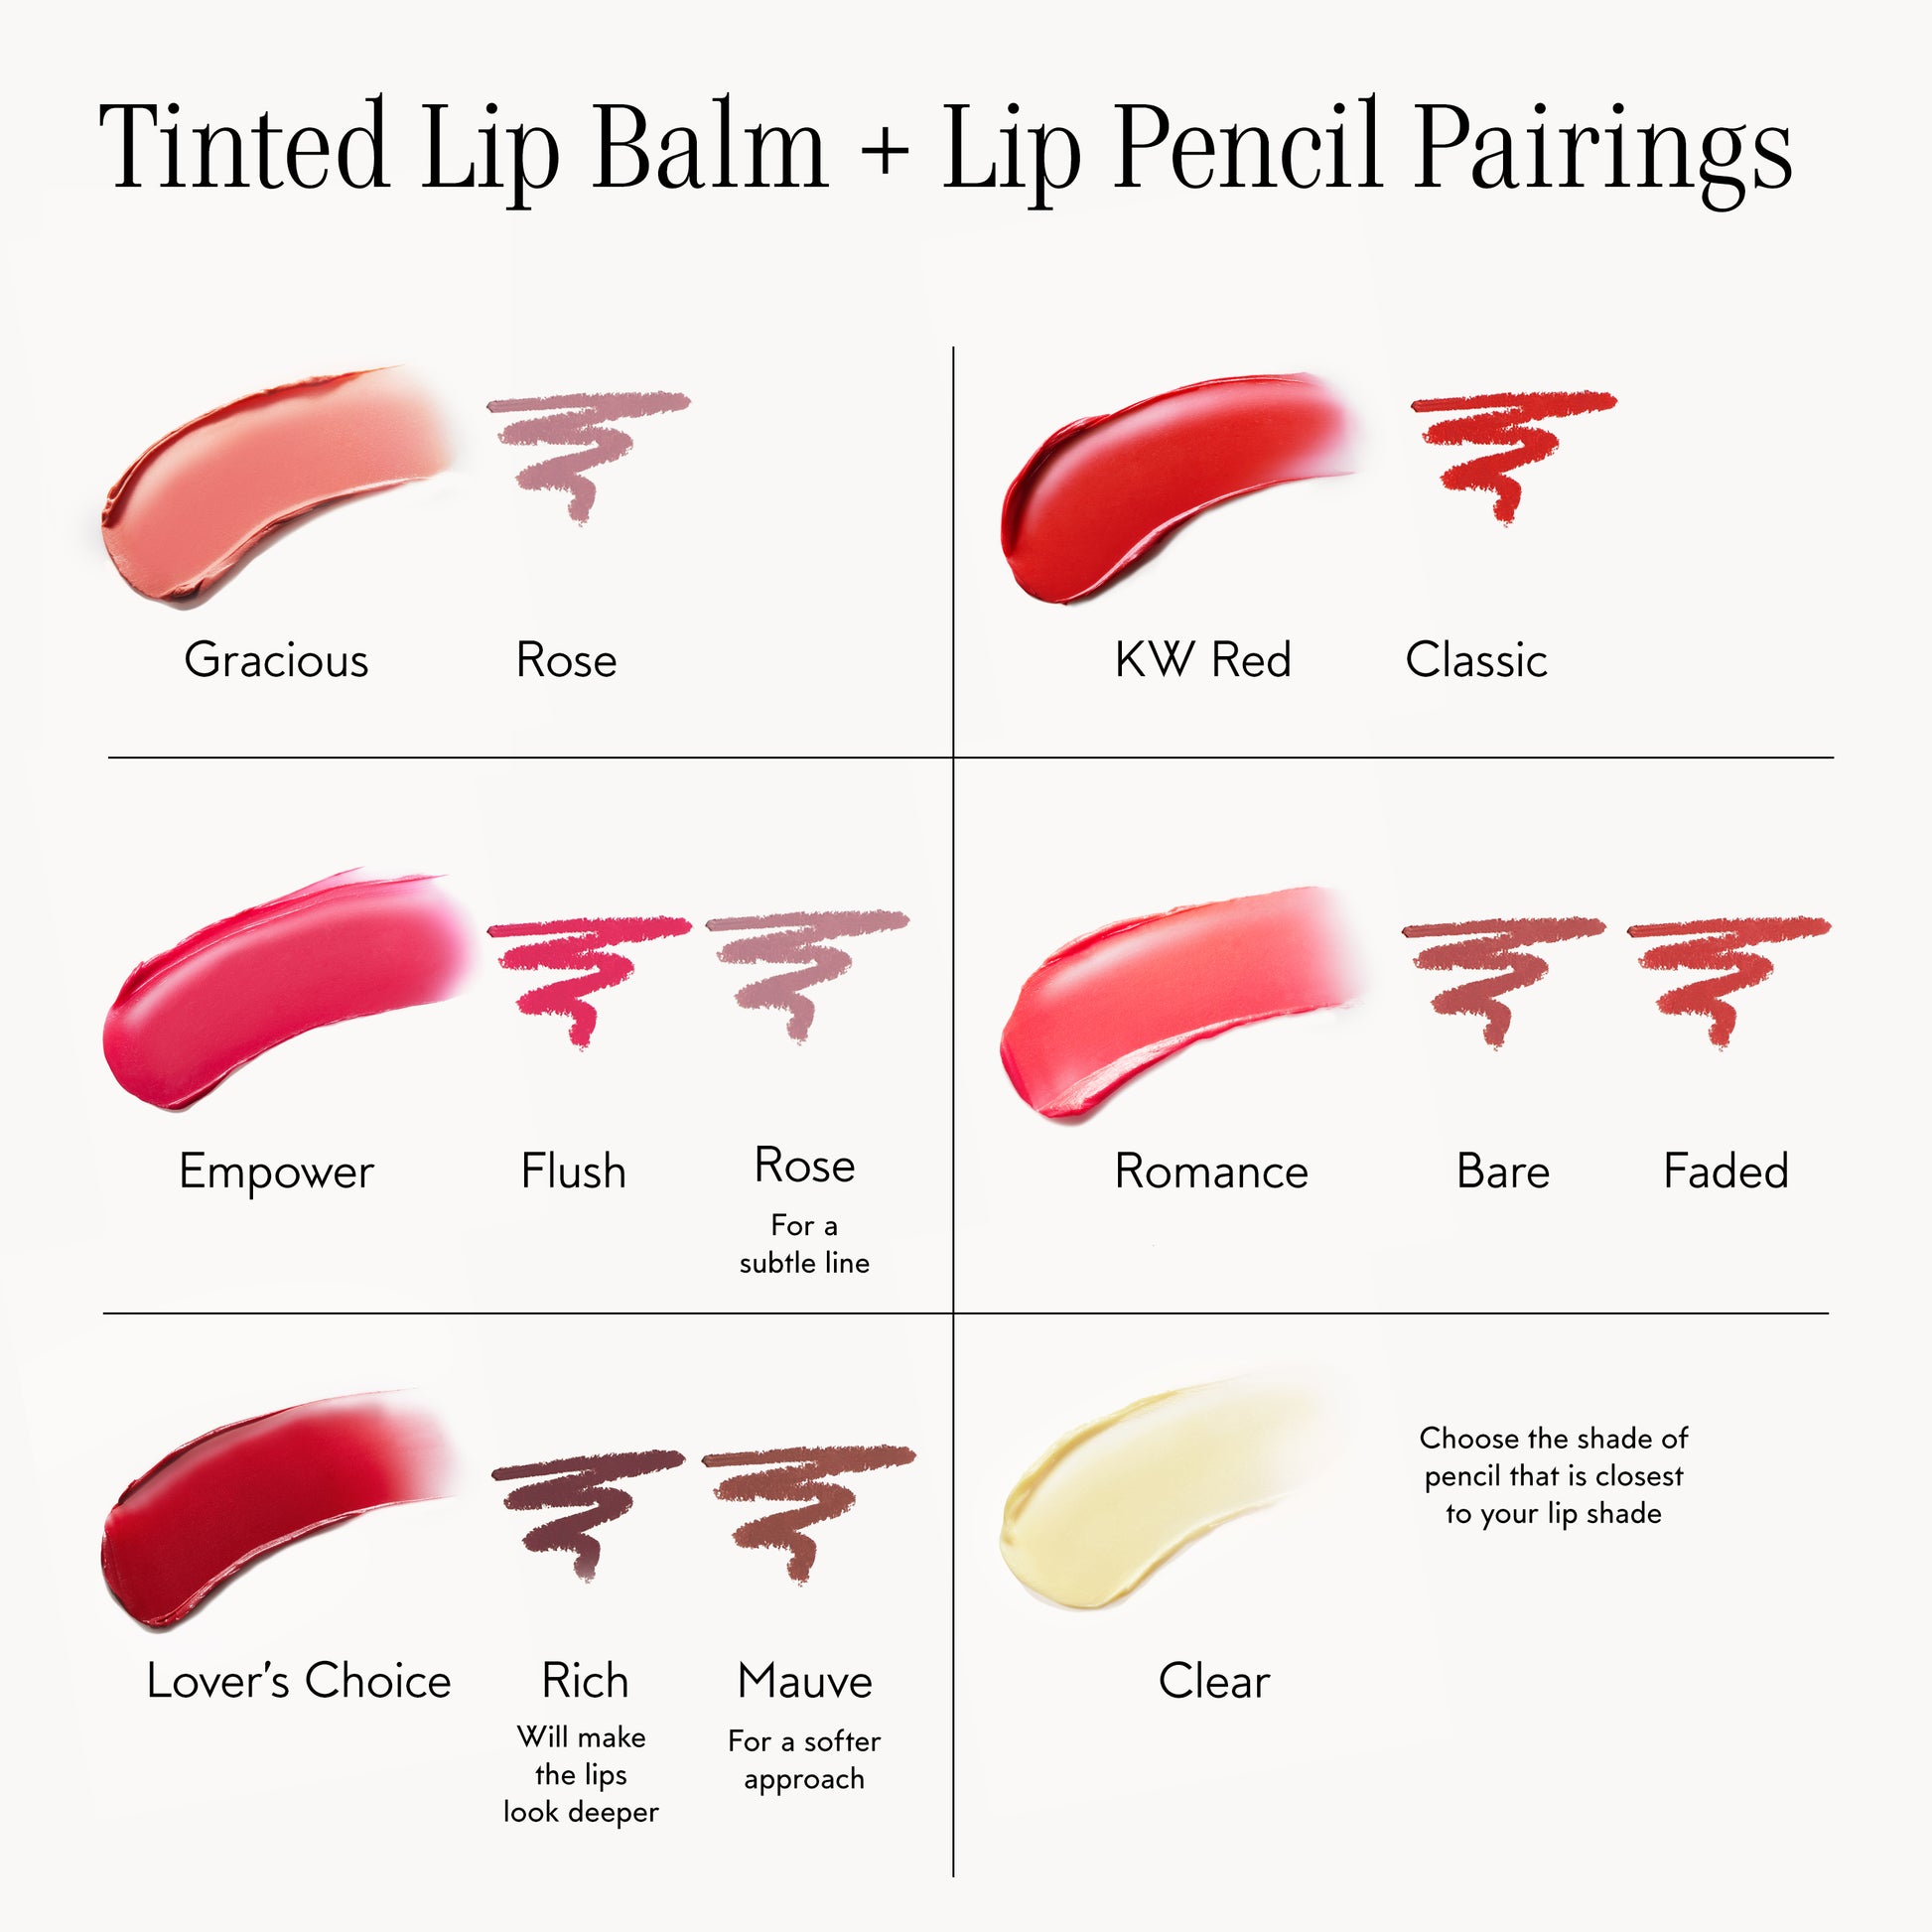 LA Cosmetic on Instagram: Get pout-worthy lips in one stroke with